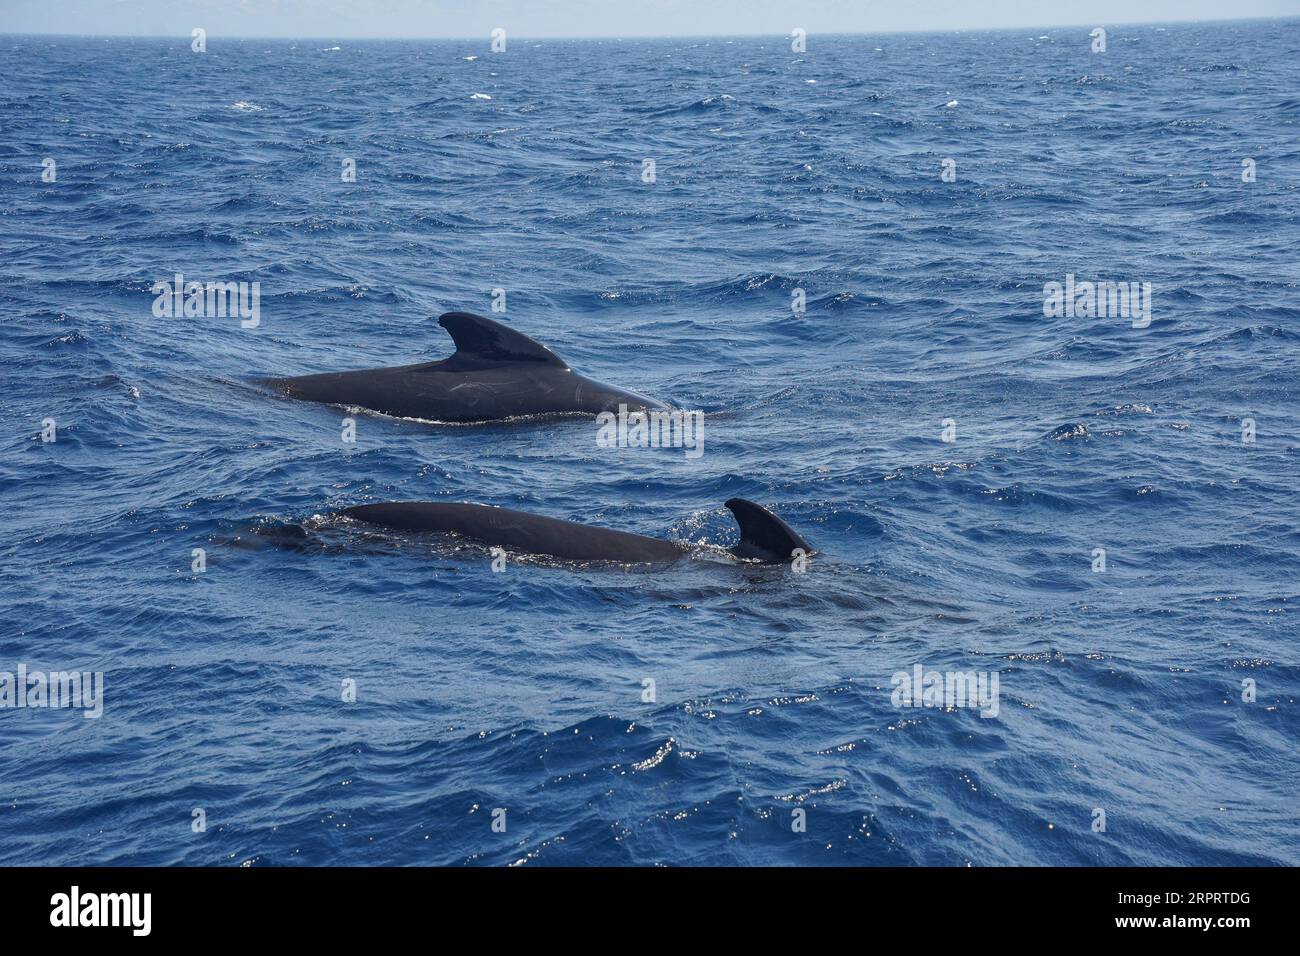 Long-finned pilot whales at Strait of Gibraltar, whale watching, Spain. Stock Photo